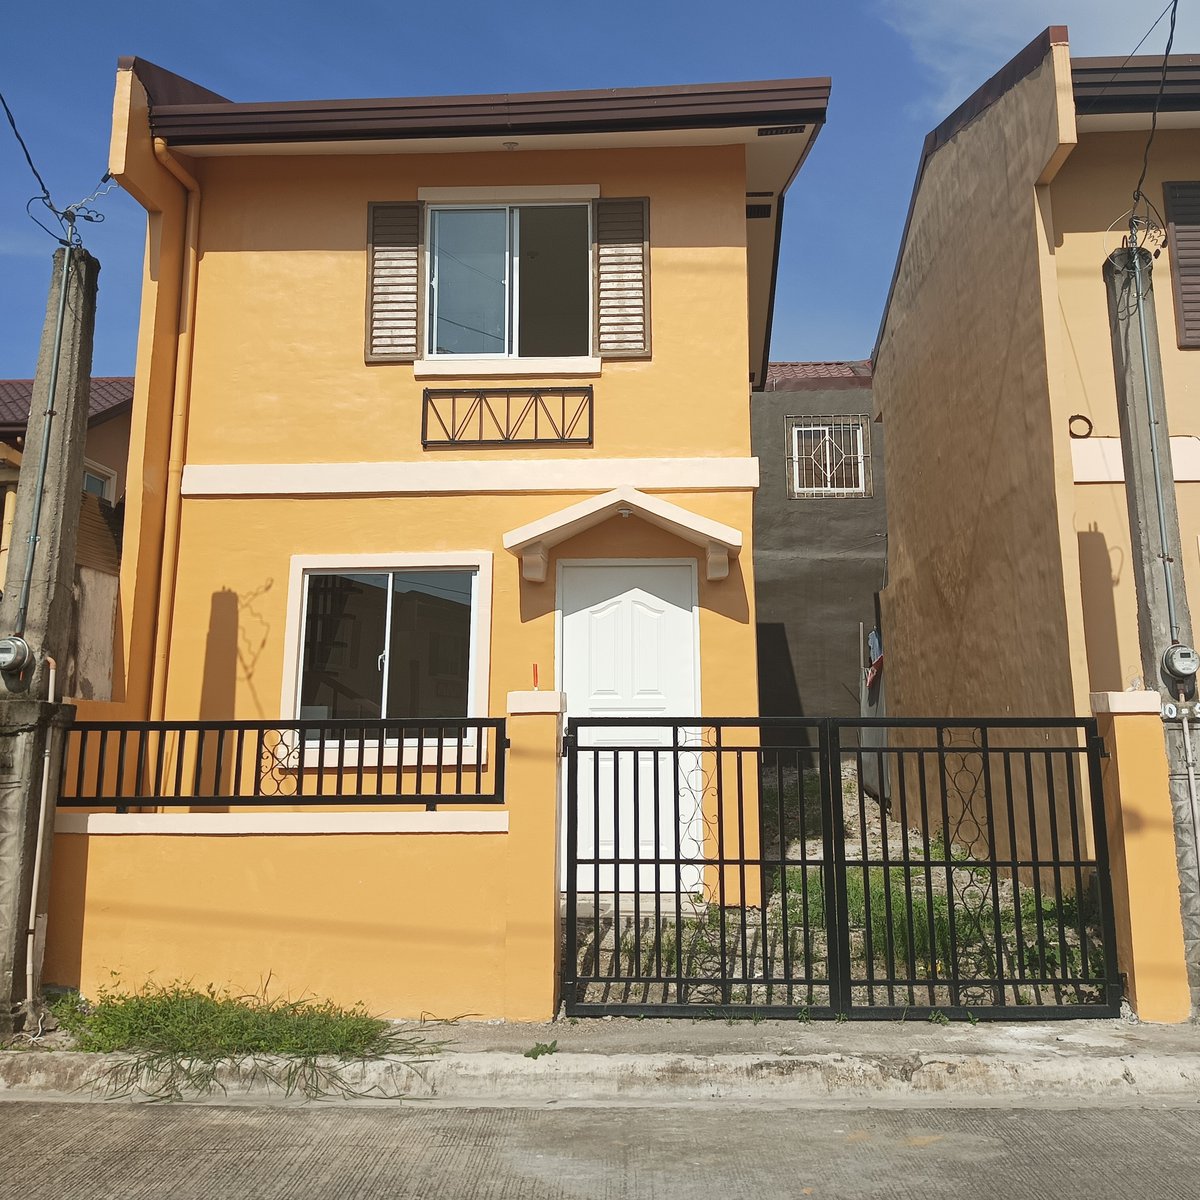 2-bedroom Single Attached House For Sale in Imus Cavite